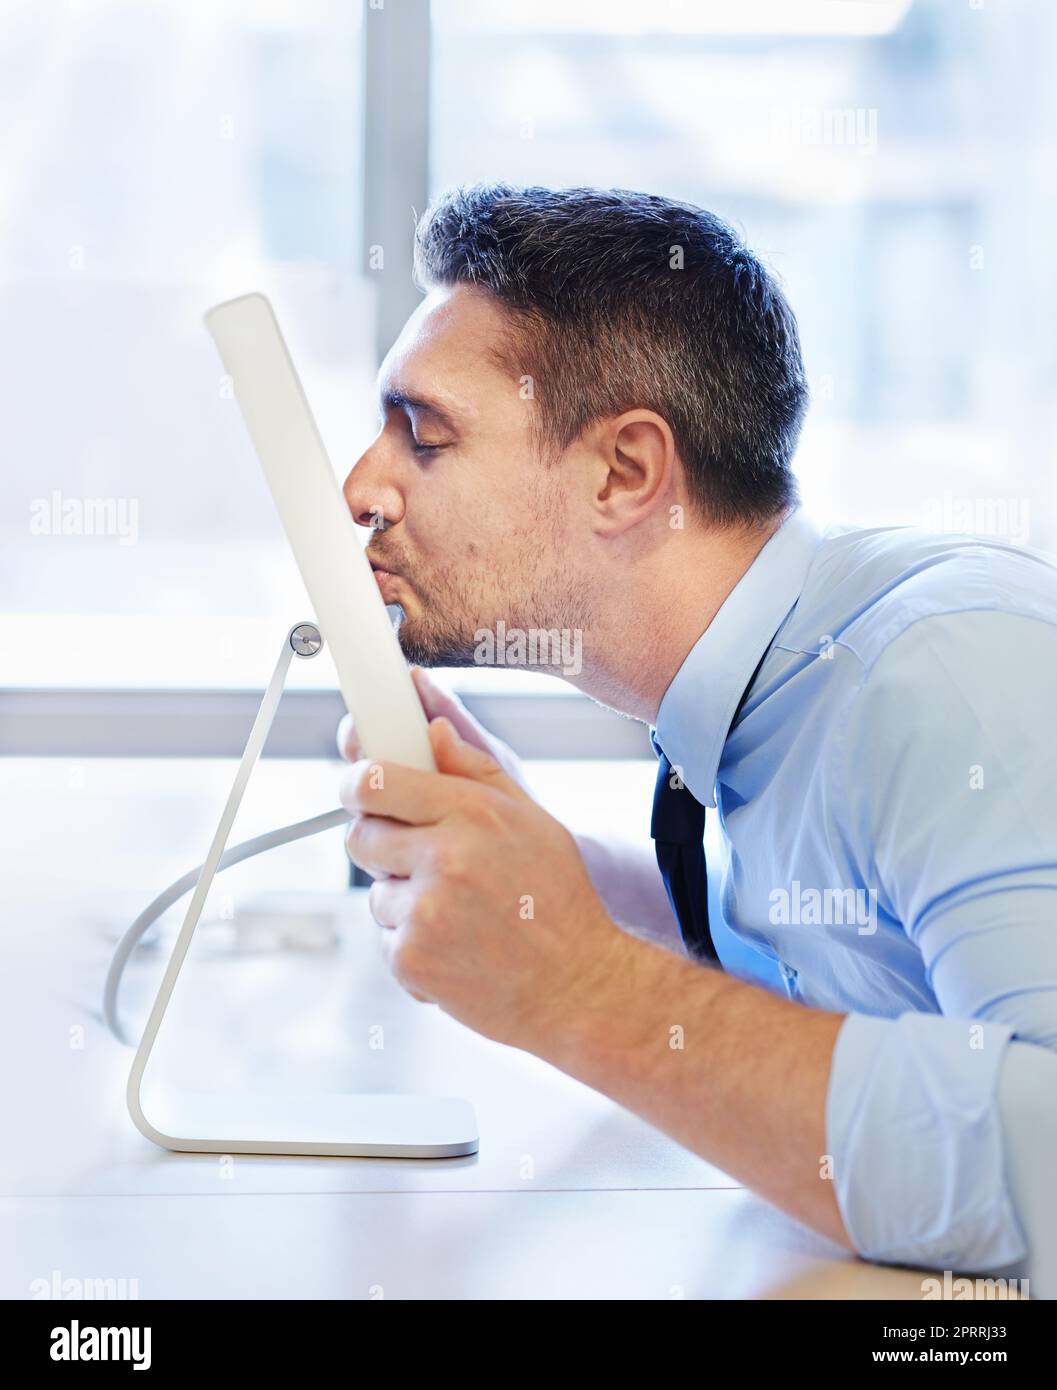 Unconventional office romance. Humorous shot of a businessman kissing his monitor. Stock Photo